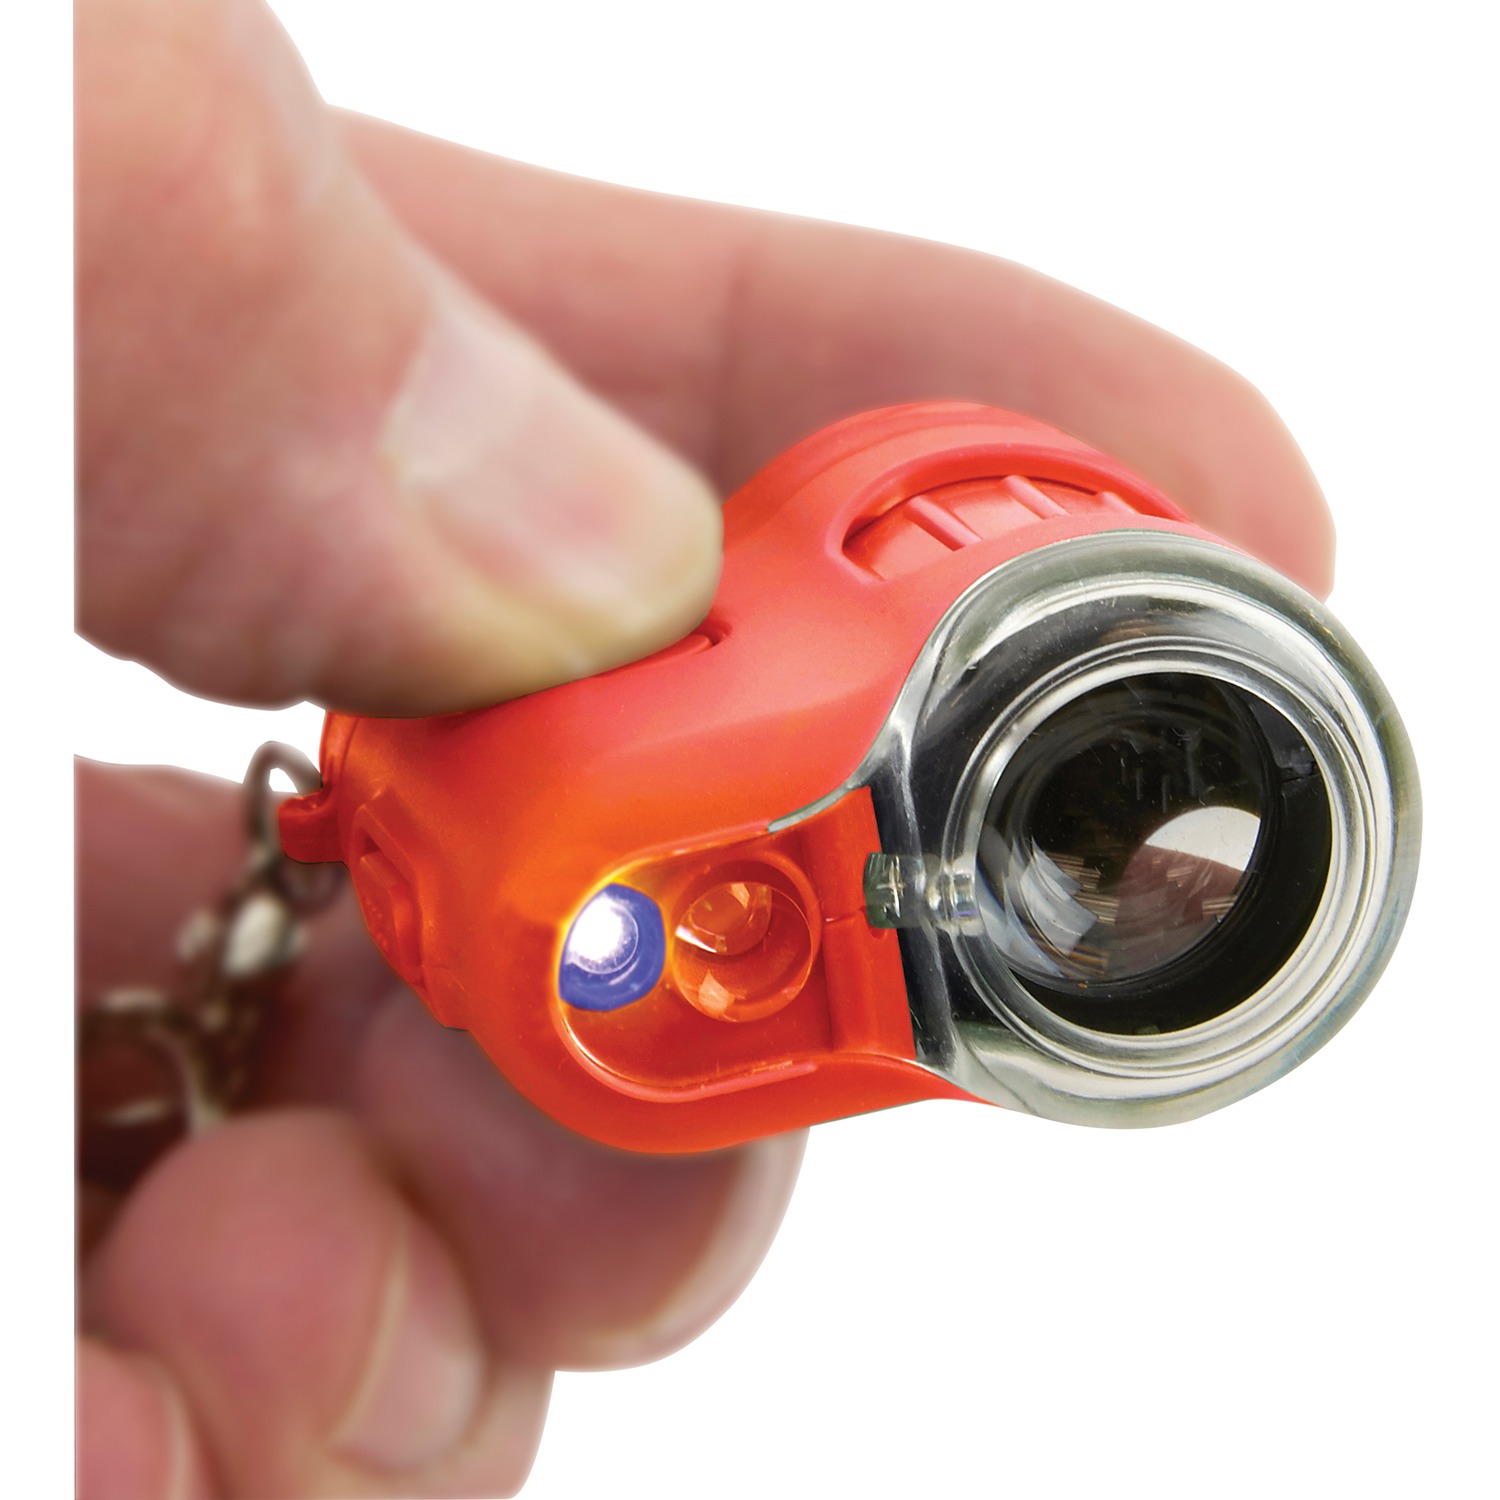 Carson MicroMini™ 20x LED Lighted Pocket Microscope with Built-In UV and LED Flashlight, Orange - image 3 of 9